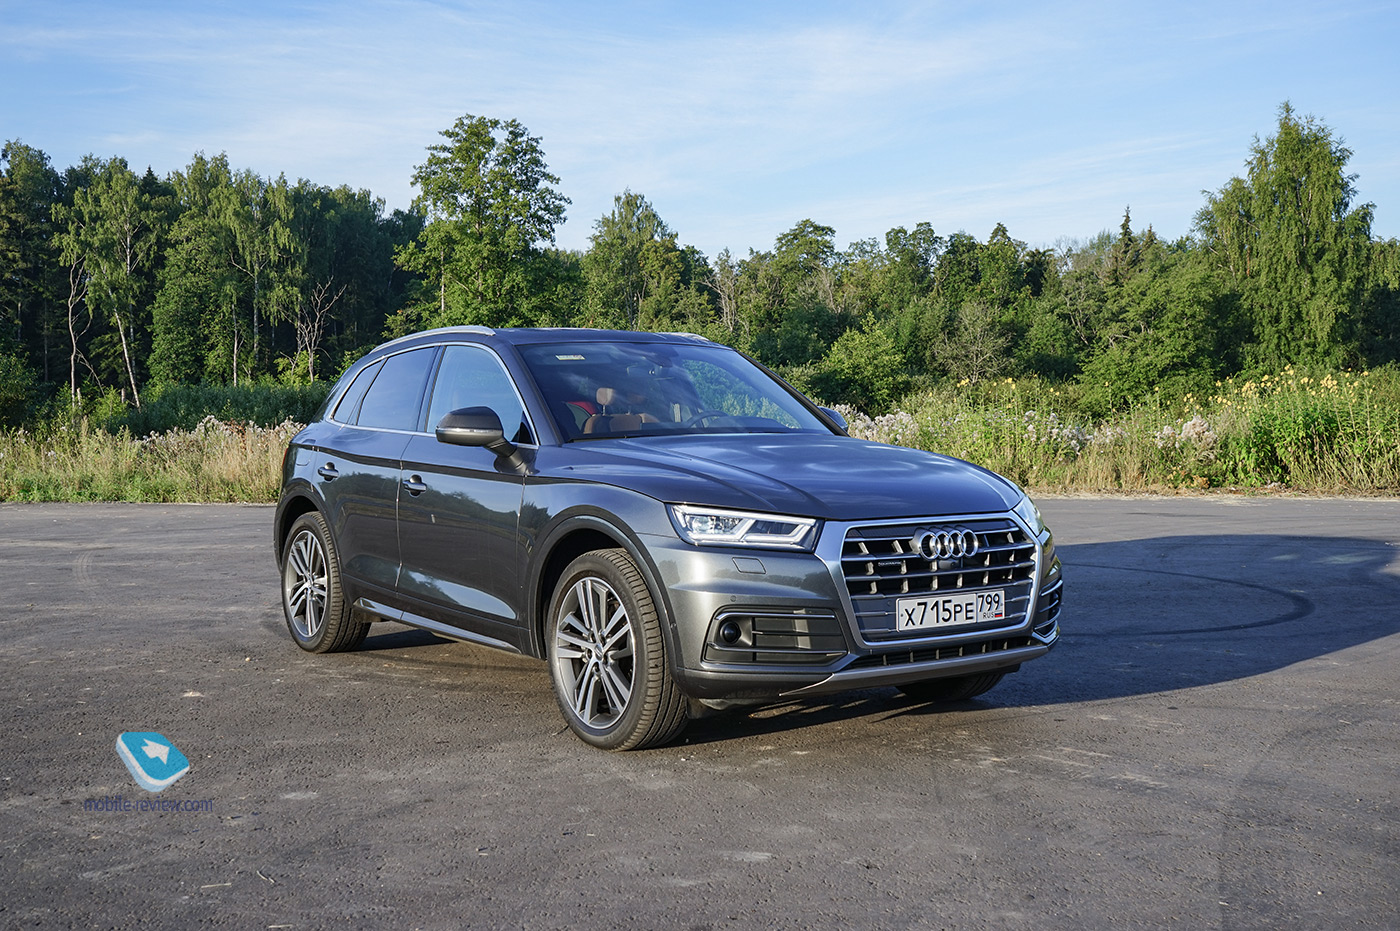 Audi Q5 test. For the family and for the soul